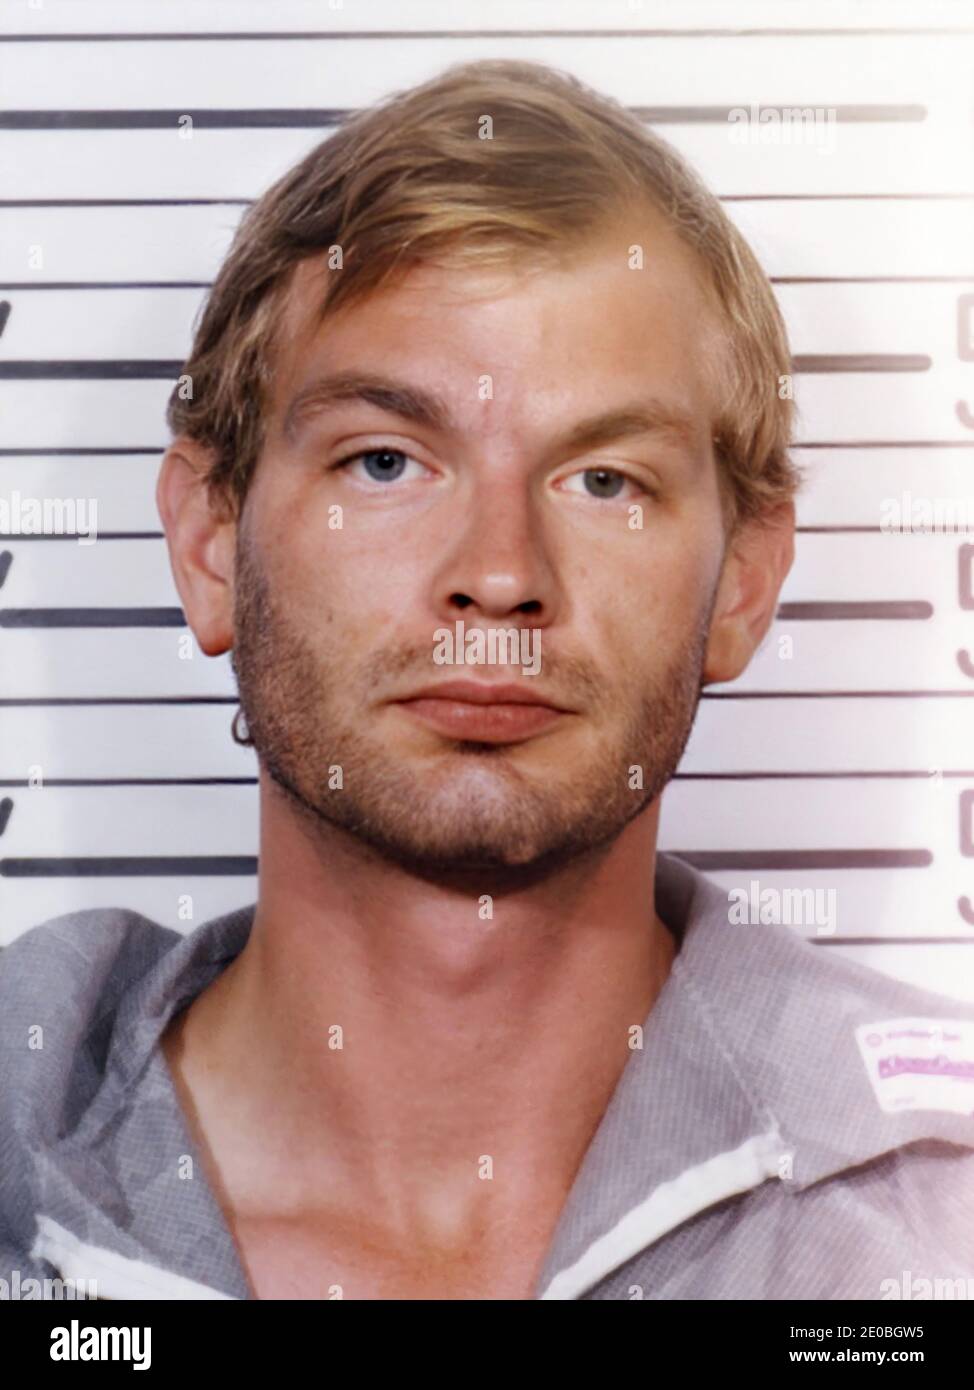 1991 , 23 july , Milwaukee , USA : JEFFREY DAHMER aka the MILWAUKEE CANNIBAL ( 1960 - 1994 ) when was arrested  like serial-killer in a photobooth of Police Department the day 8 august 1982 . Dahmer was an American spree killer who murdered at least 17 people , from 1978 to 1991 . - SERIAL KILLER - Mostro di Milwaukee - The Monster of - portrait - ritratto - serial-killer - assassino seriale - CRONACA NERA - criminale - criminal - SERIAL KILLER  - GAY - LGBT - CANNIBALE - cannibalismo - omosessuale - omosessualità - homosexuality - homosexual - foto segnaletica della Polizia - photo booth --- Stock Photo